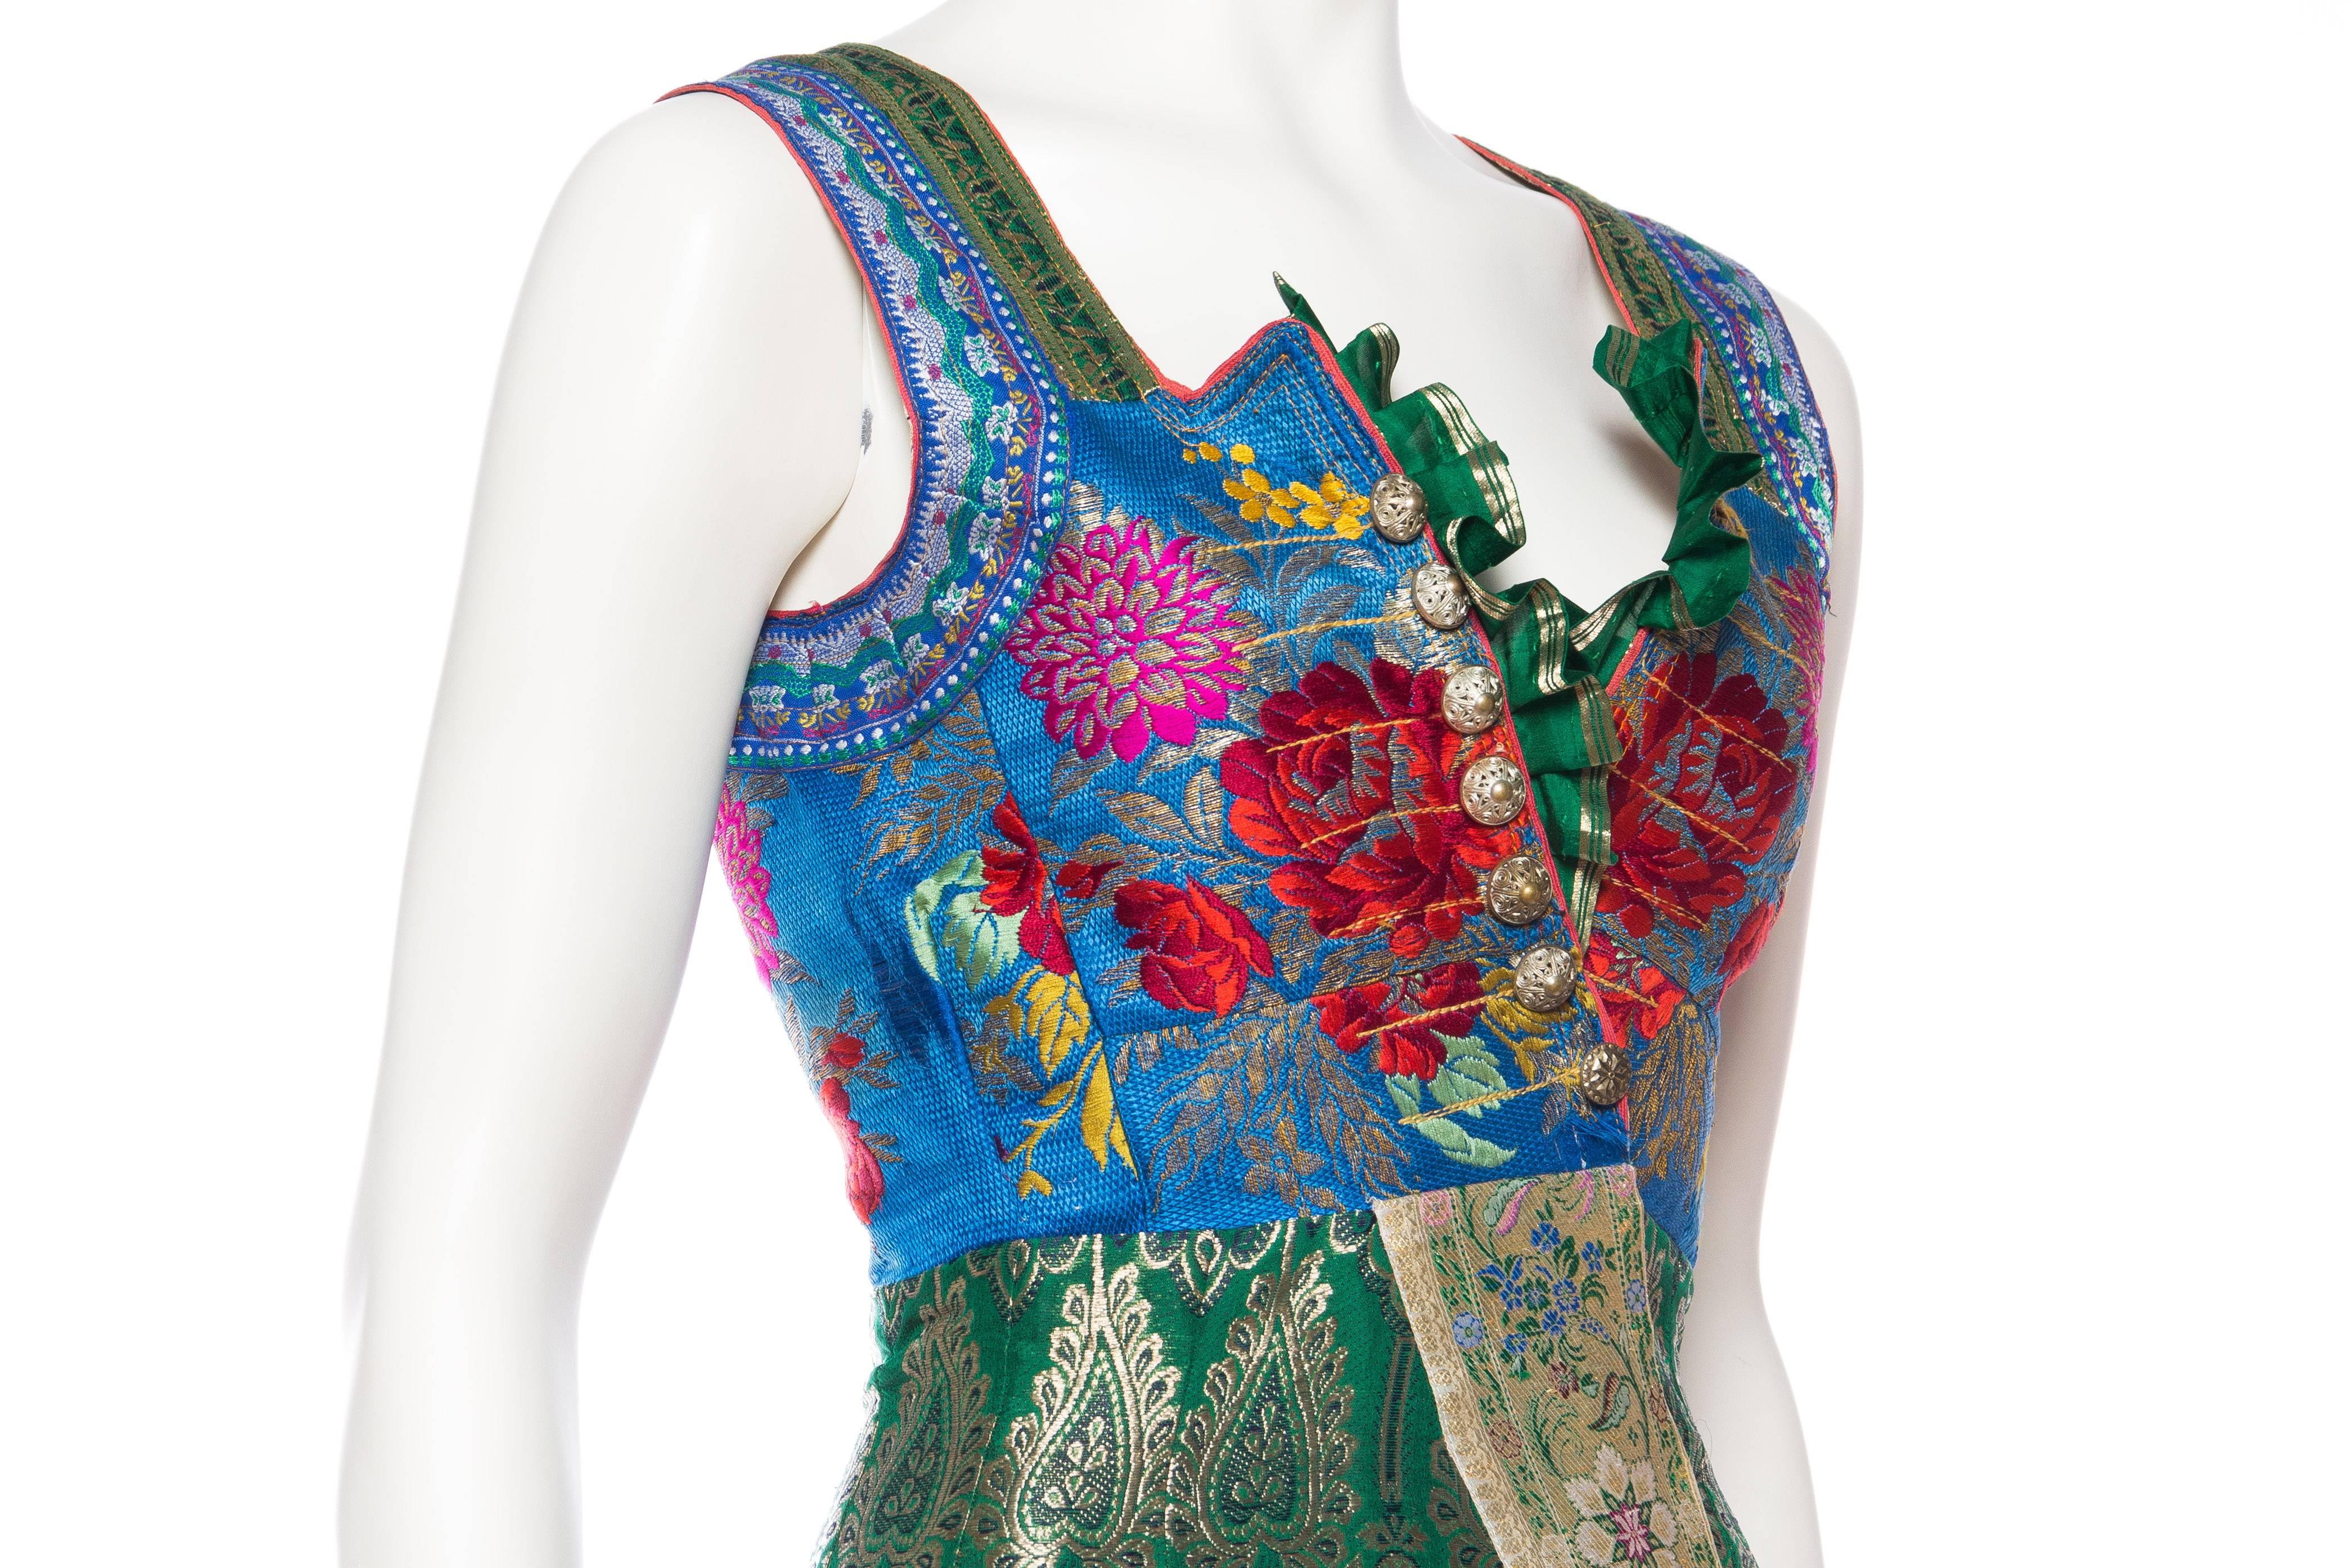 Dress made from Antique Folk and Indian Silks with Metallics 1